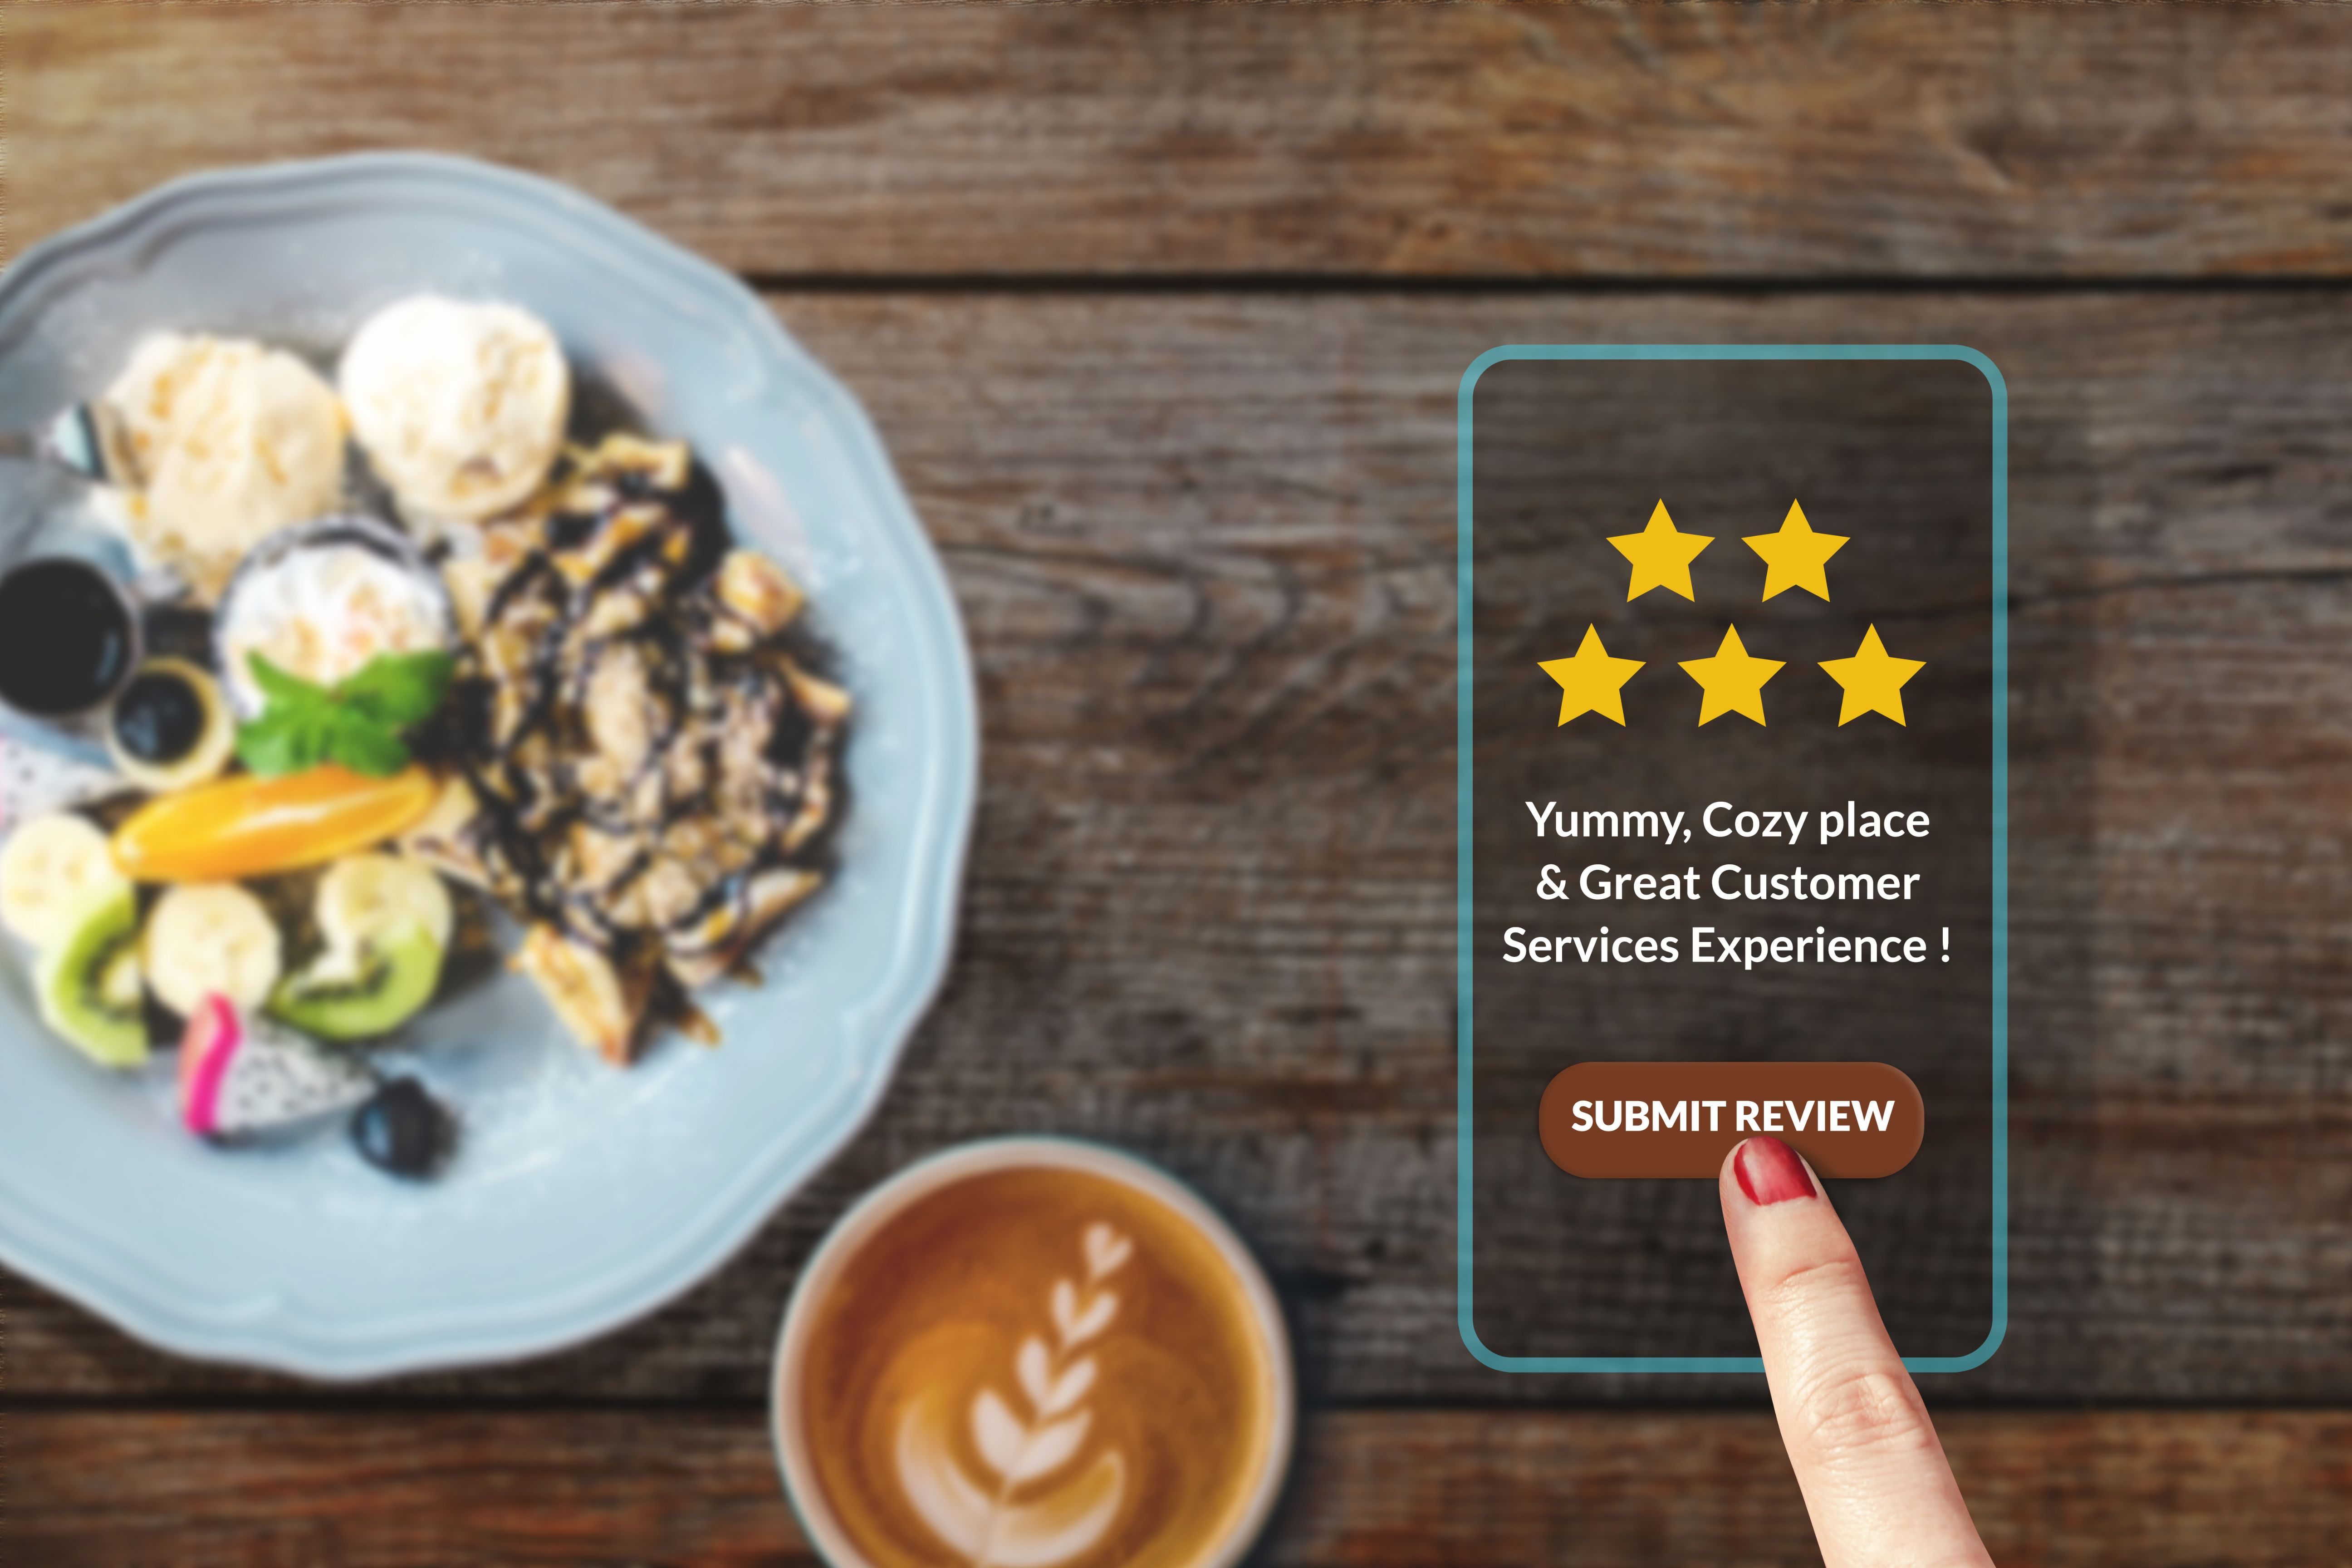 How to get better restaurant reviews: deliver an ‘amazing experience’